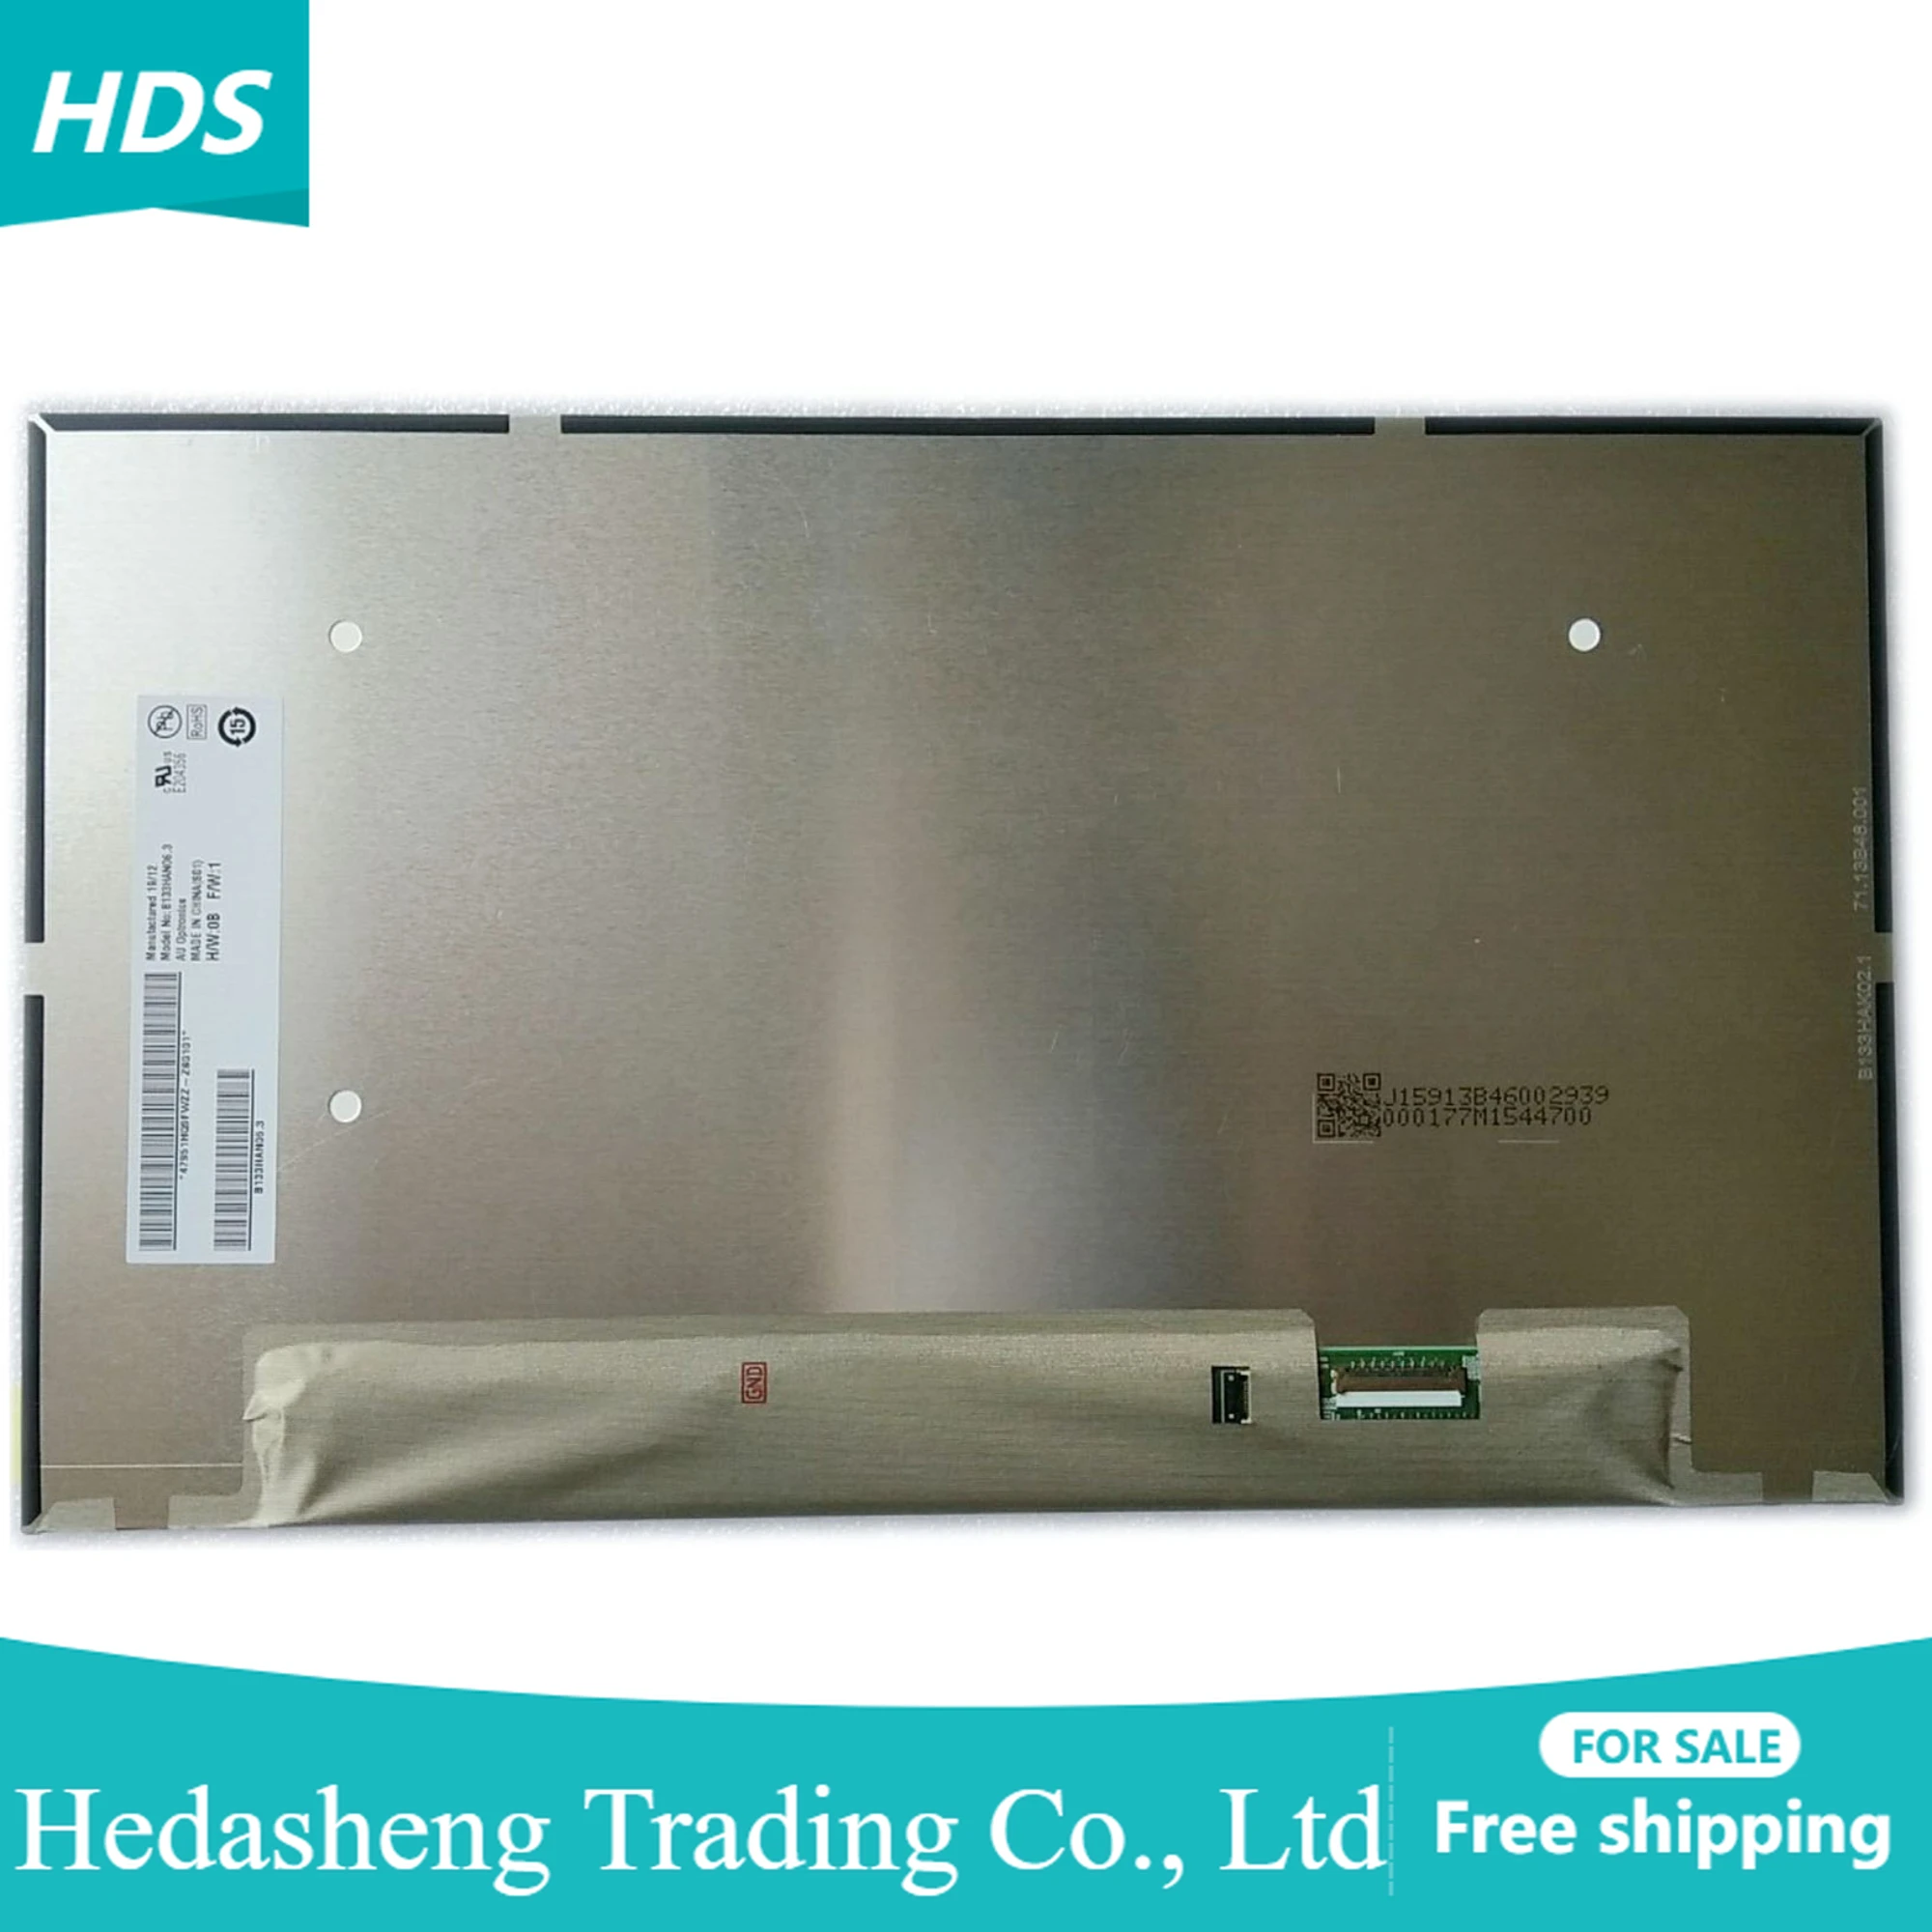 

B133HAN06.3 IPS FHD 1080p Replacement Display New 13.3"inch LCD LED Screen